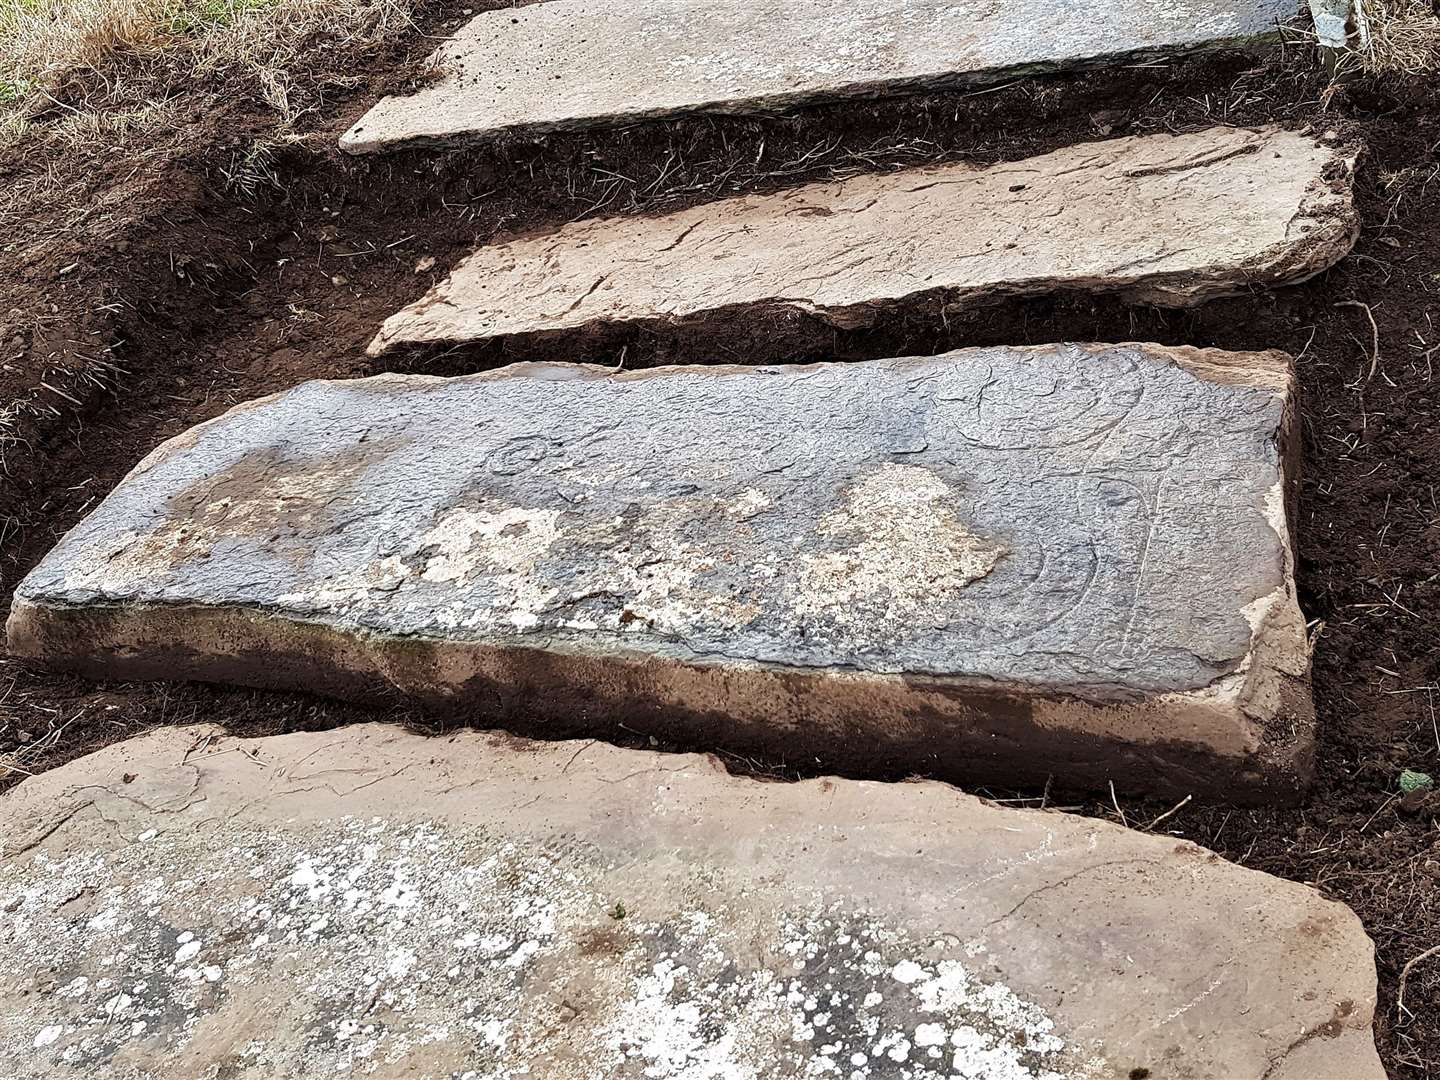 Fiona Begg took pictures of the stone slab soon after uncovering it and finding wavy lines on its surface. She knew these were of Pictish origin. Picture: Fiona Begg